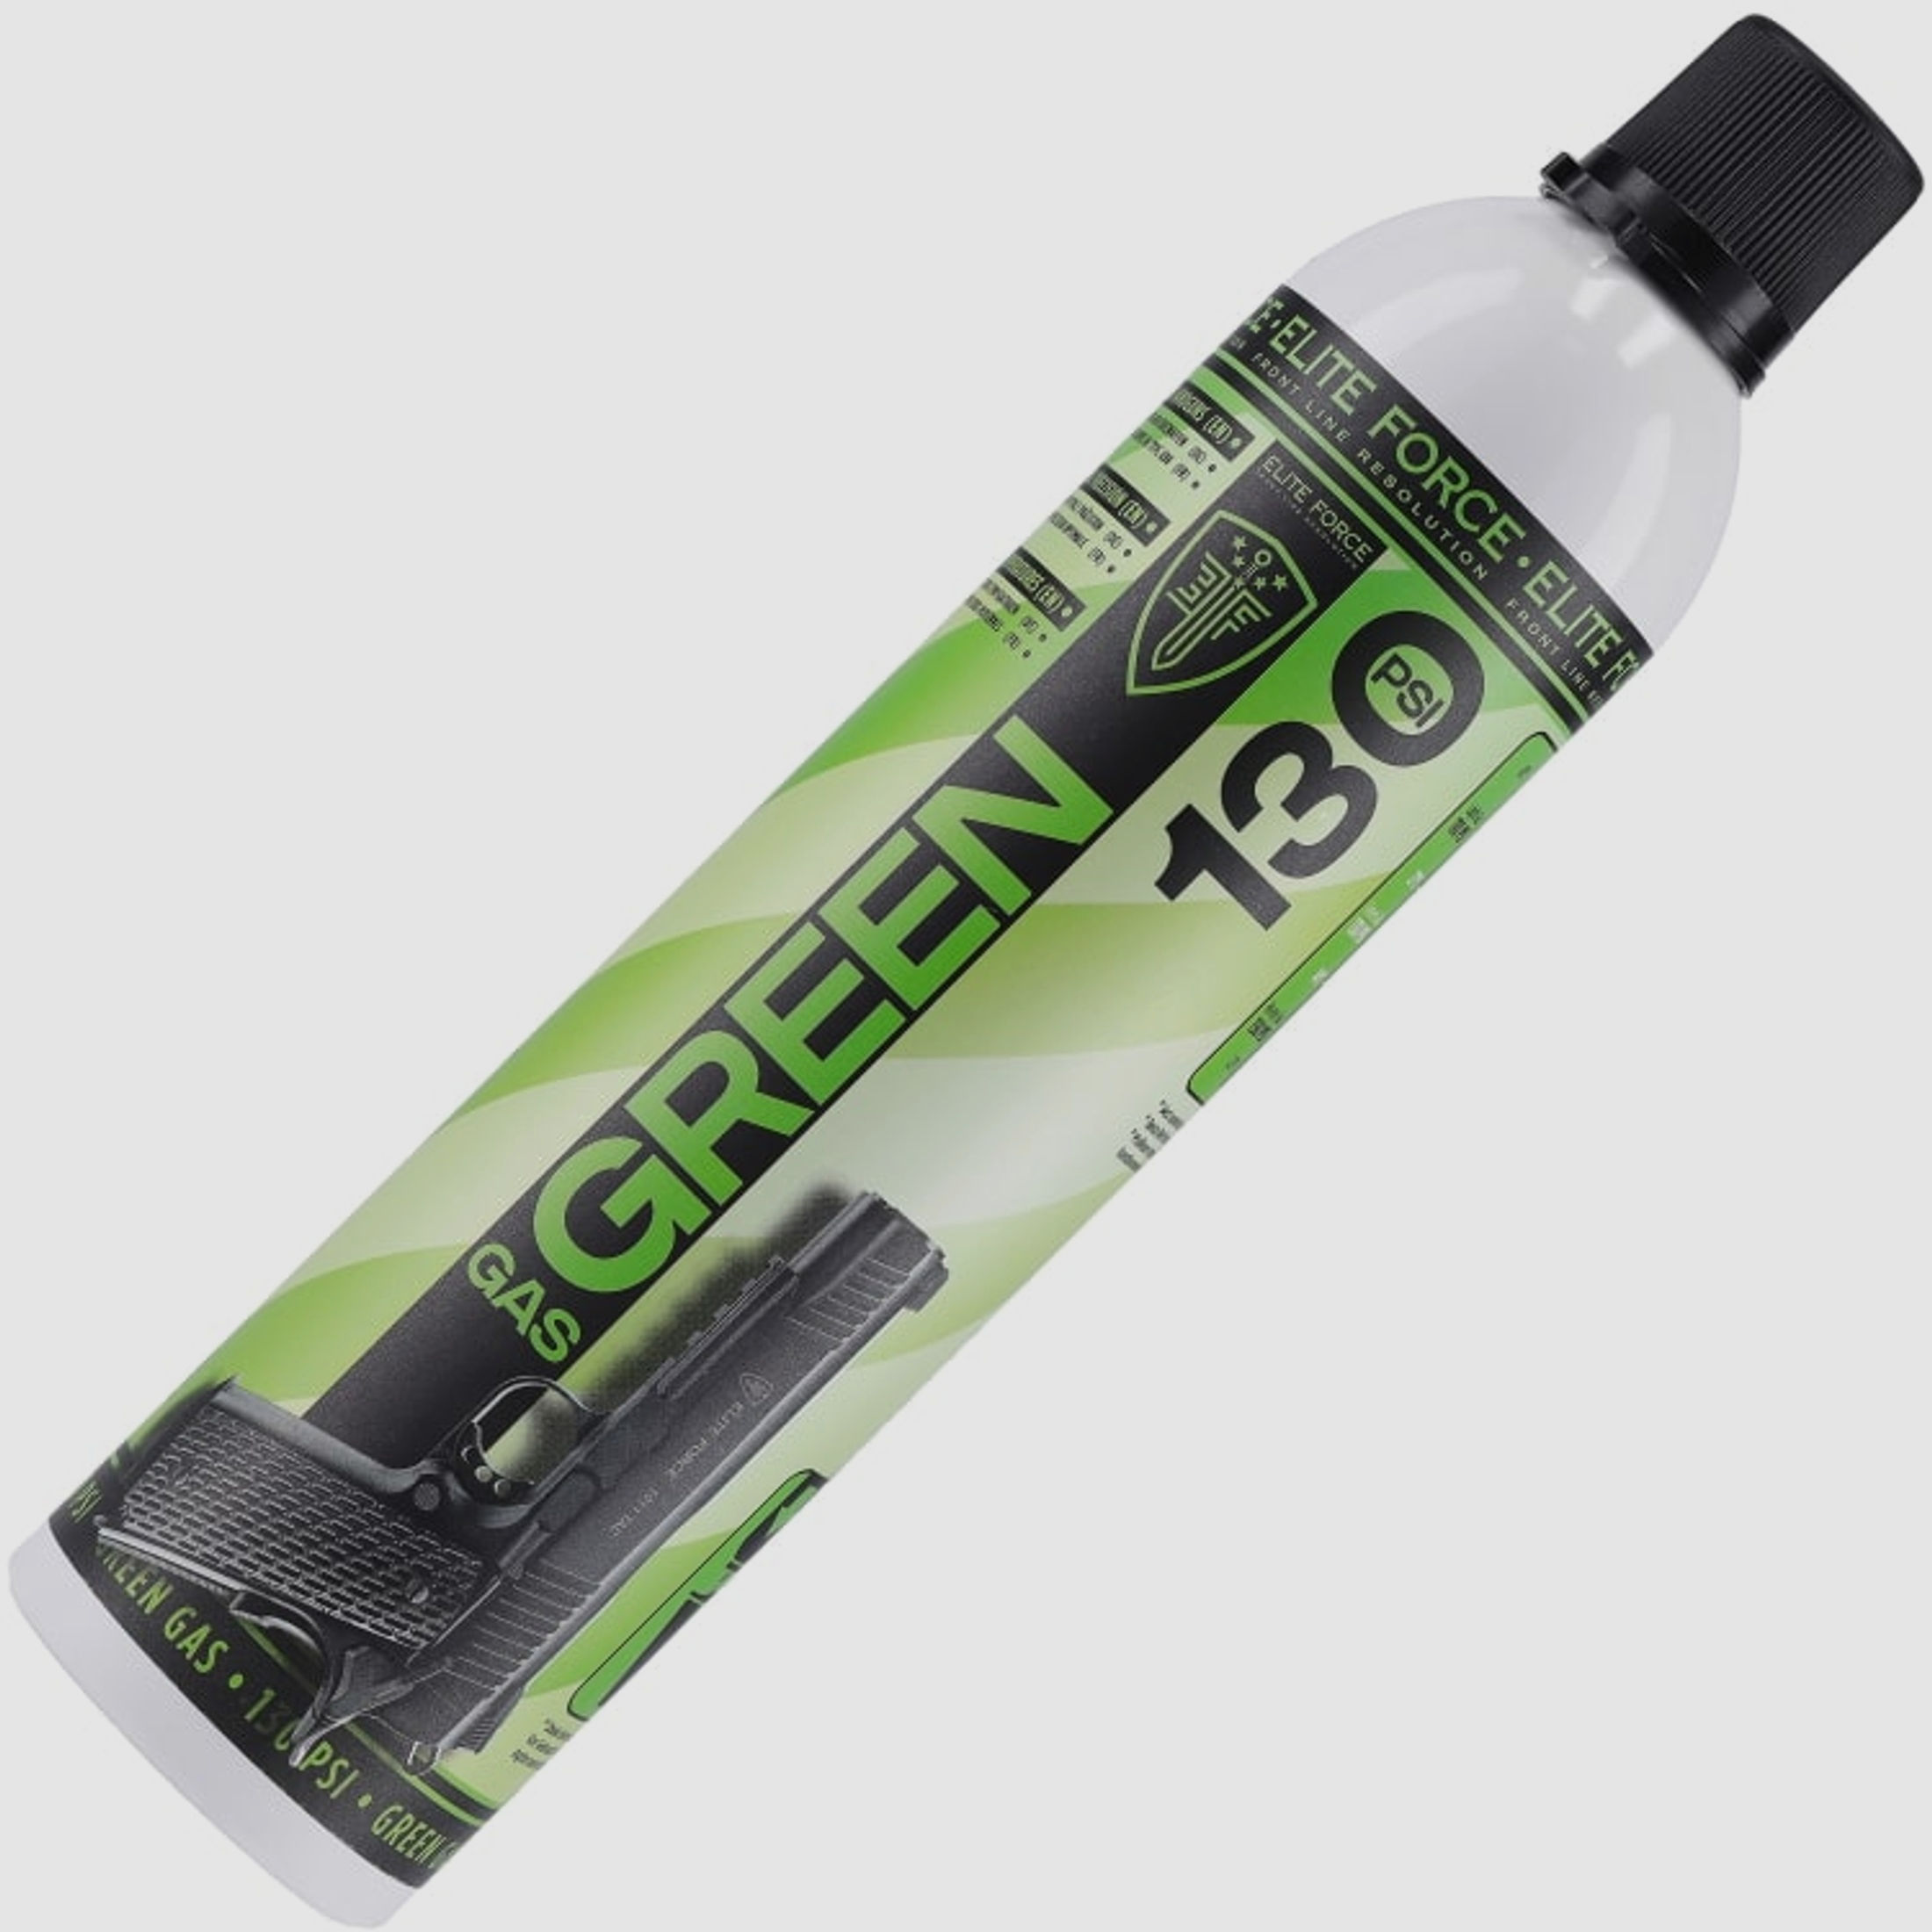 Elite Force Airsoft Green Gas (130 psi) - 600ml